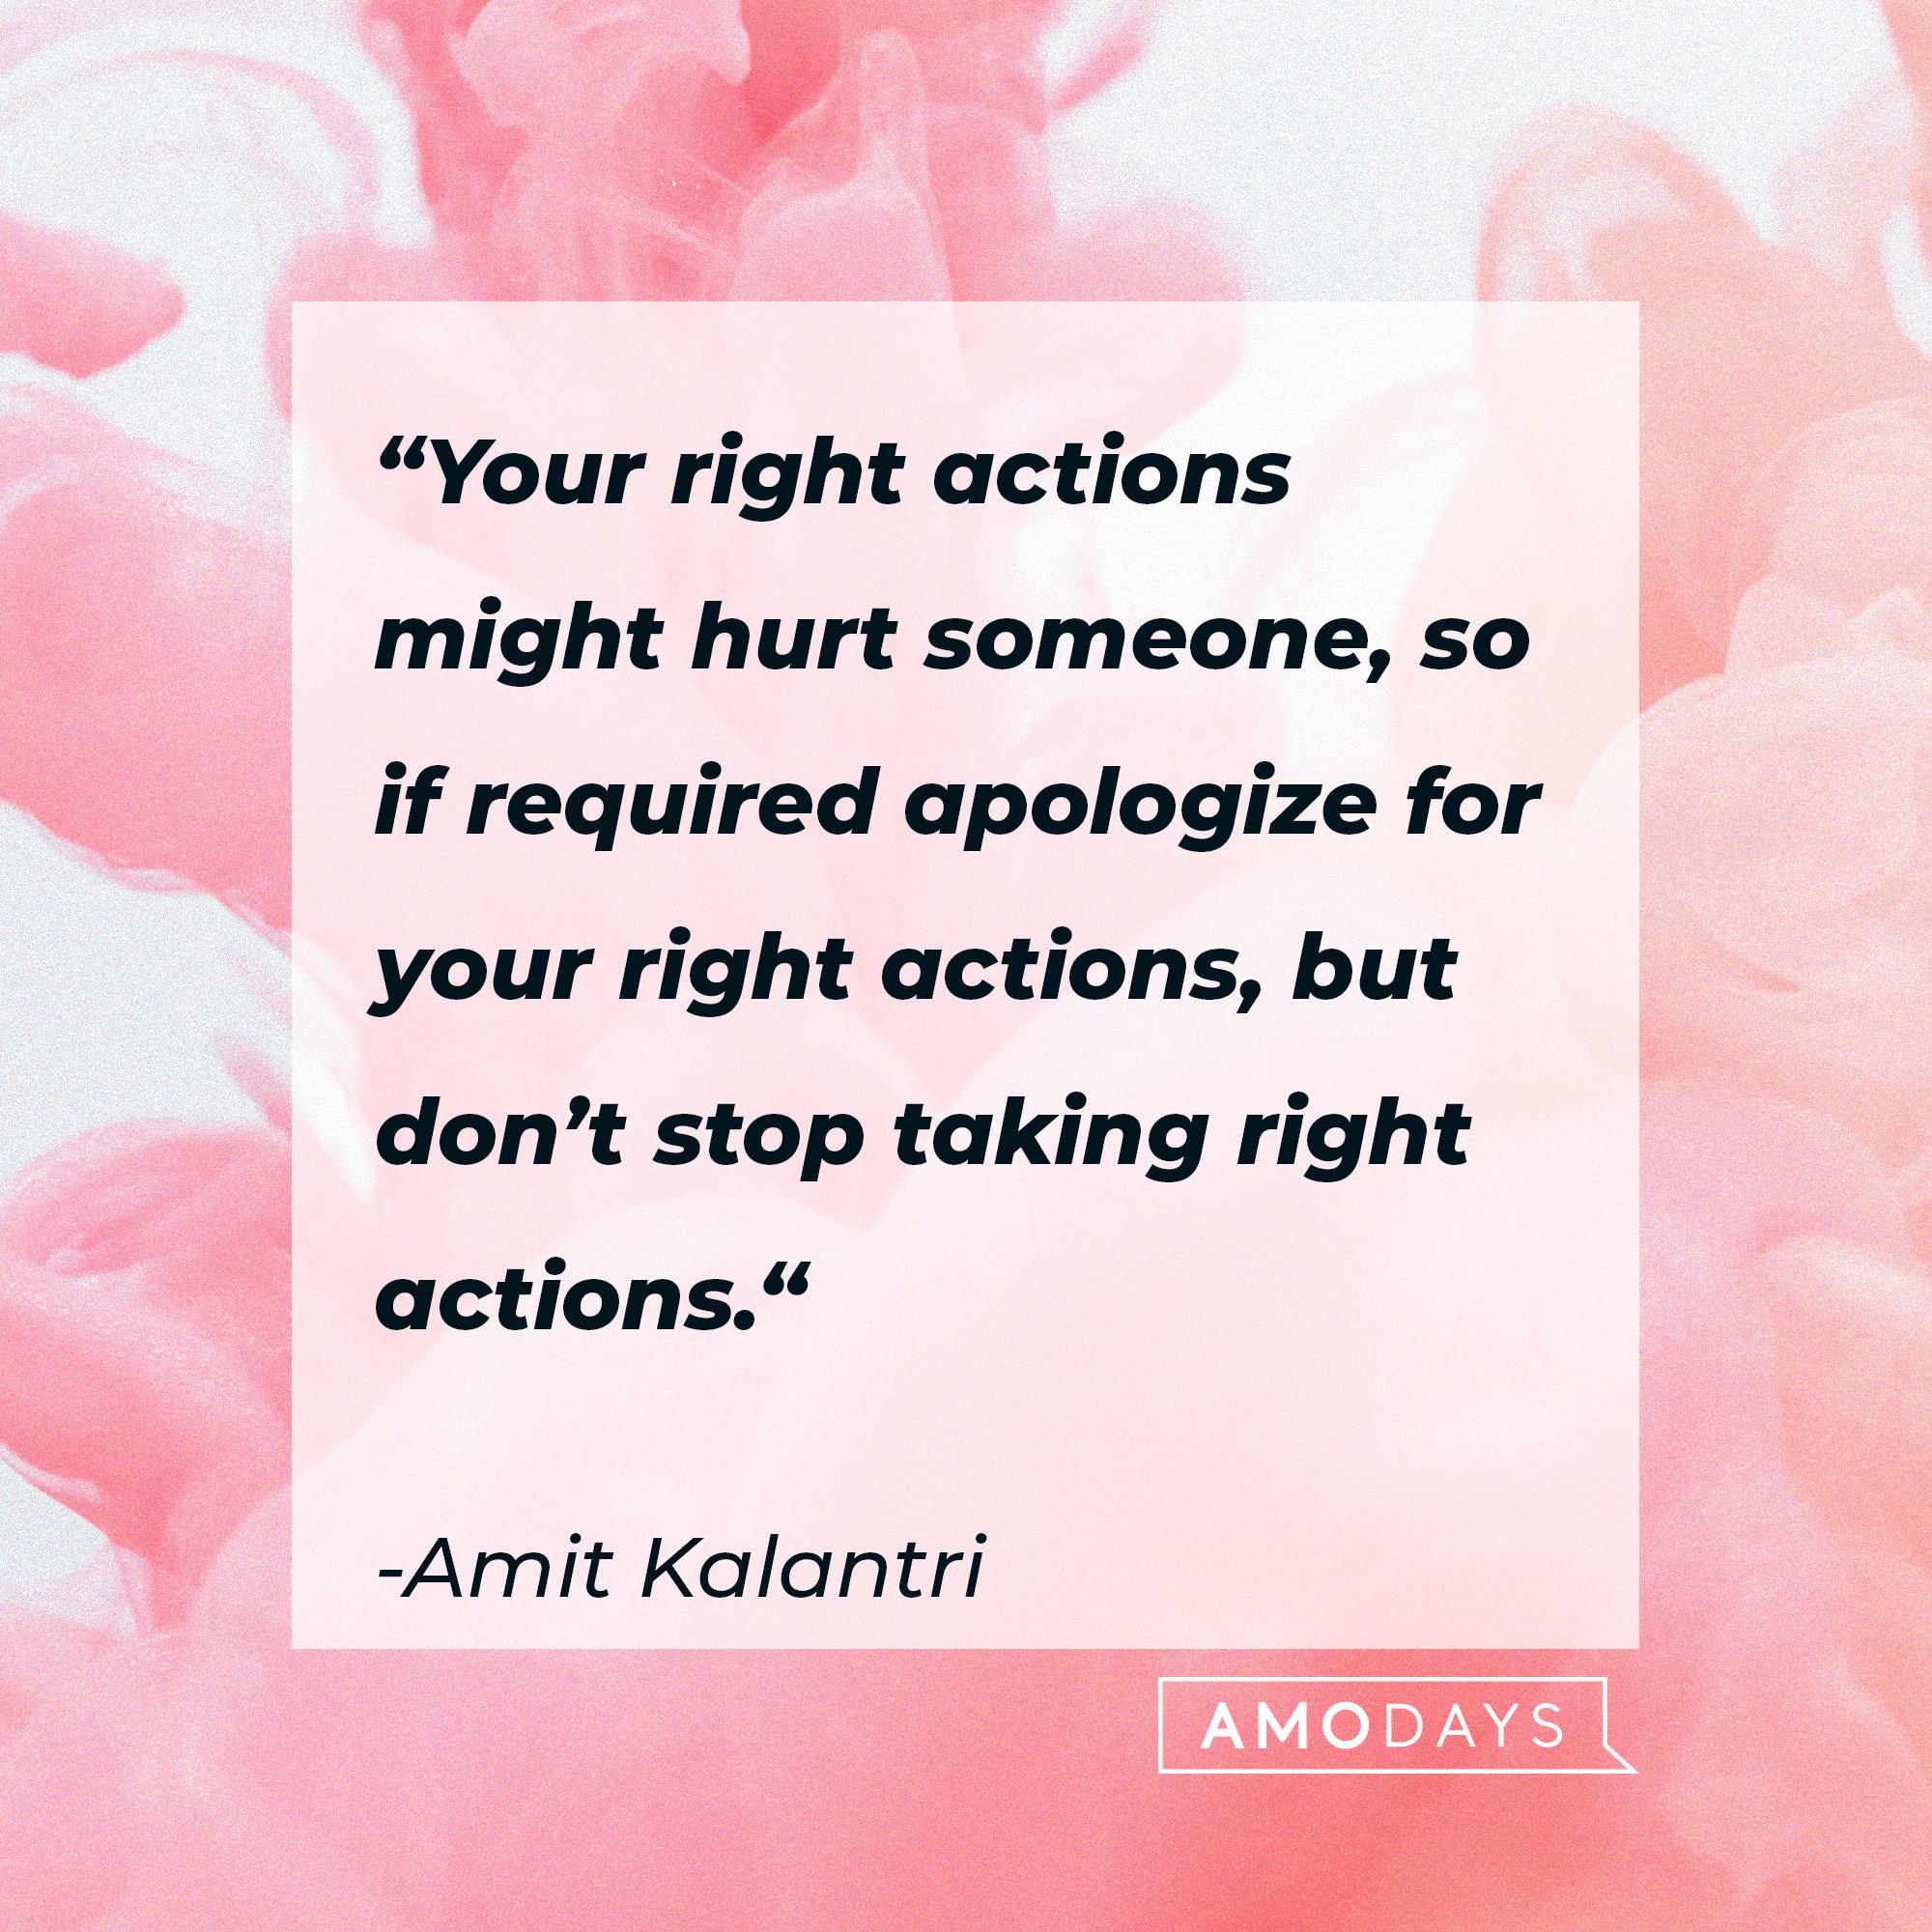  Amit Kalant's quote: “Your right actions might hurt someone, so if required apologize for your right actions, but don’t stop taking right actions.“| Image: AmoDaysri